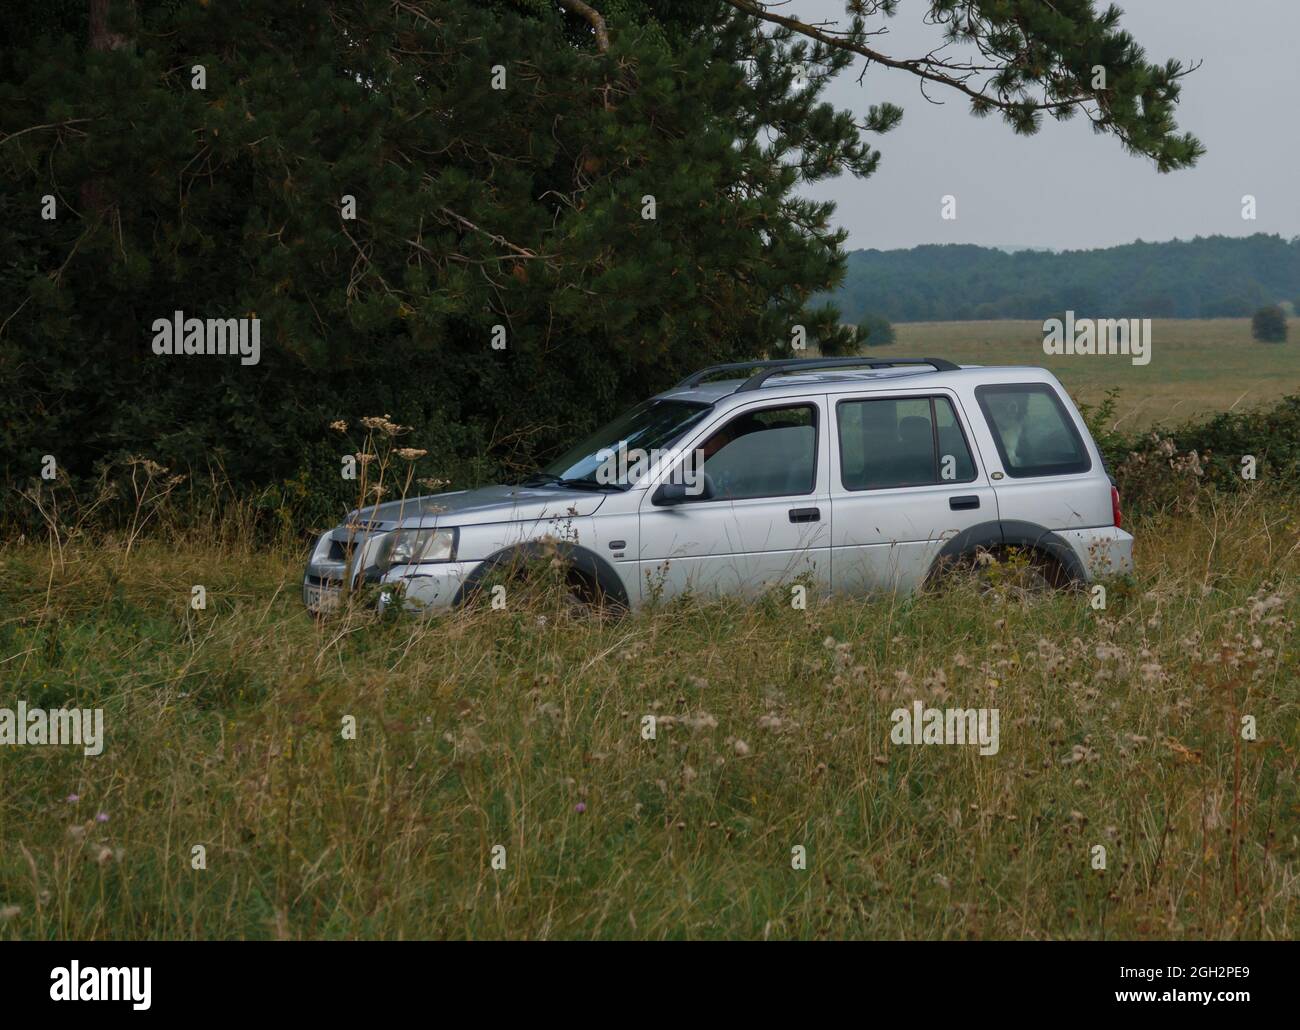 A Land Rover Freelander in motion with a Stock Photo